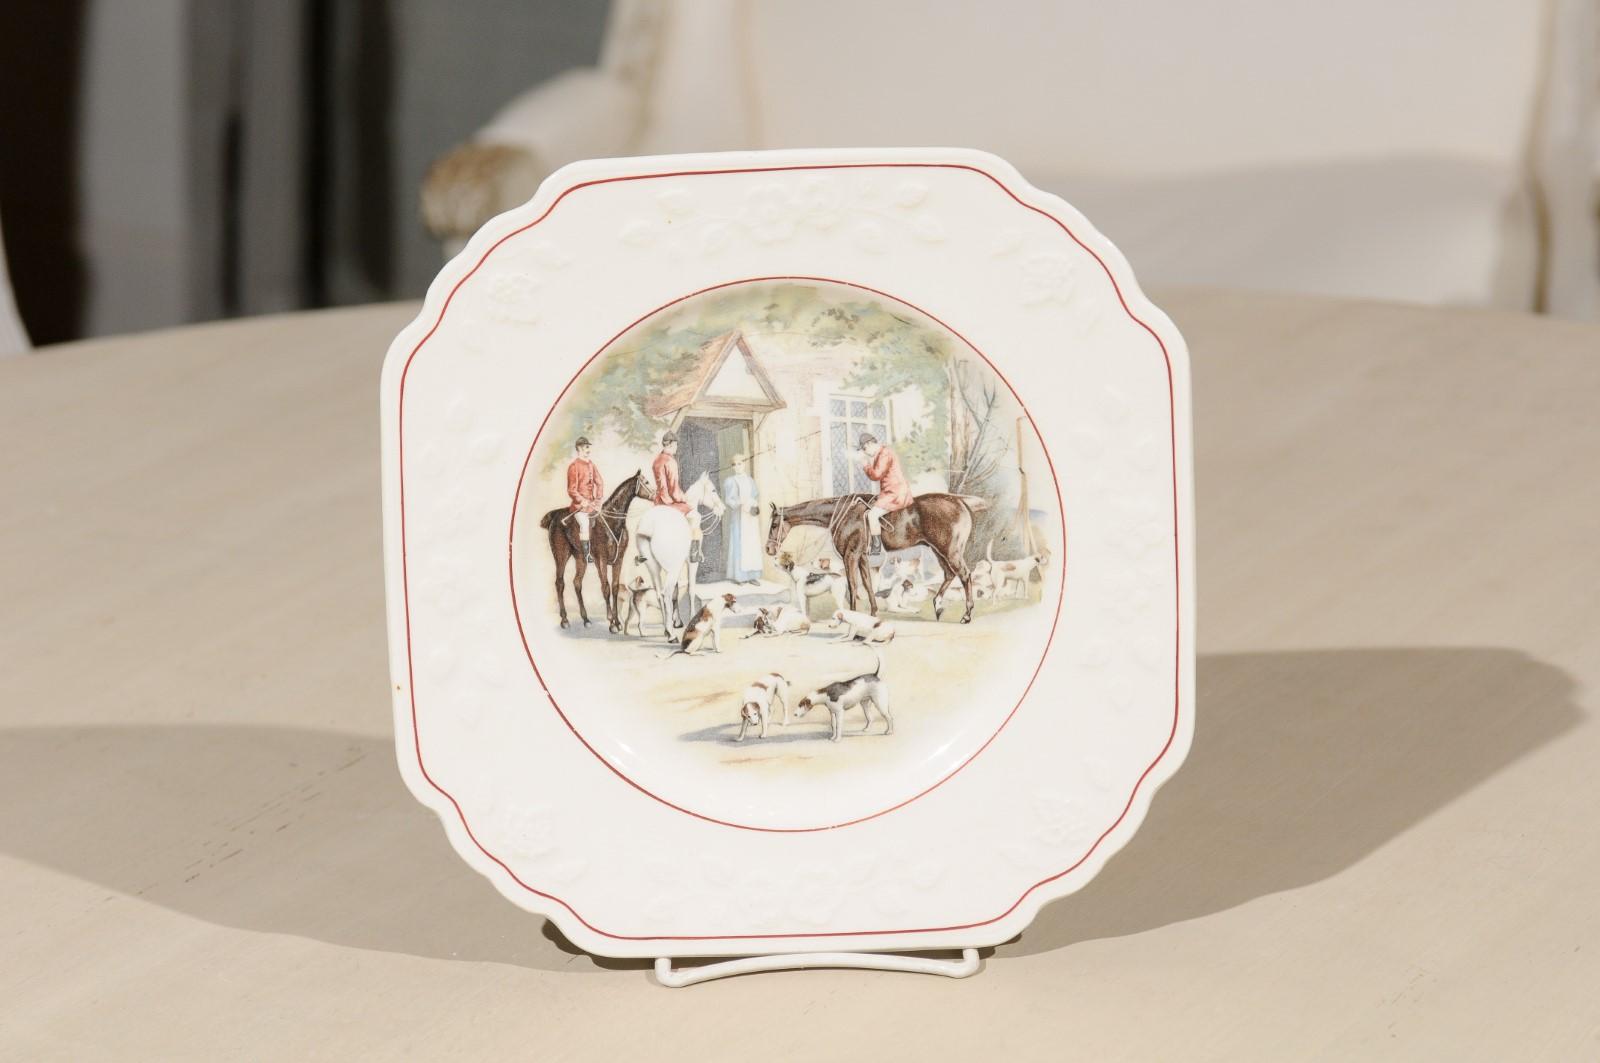 An English Wedgwood & Co decorative plate from the early 20th century, with country scene and printed mark in the back. Born in Born in the Staffordshire County during the second decade of the 20th century, this charming plate features a charming